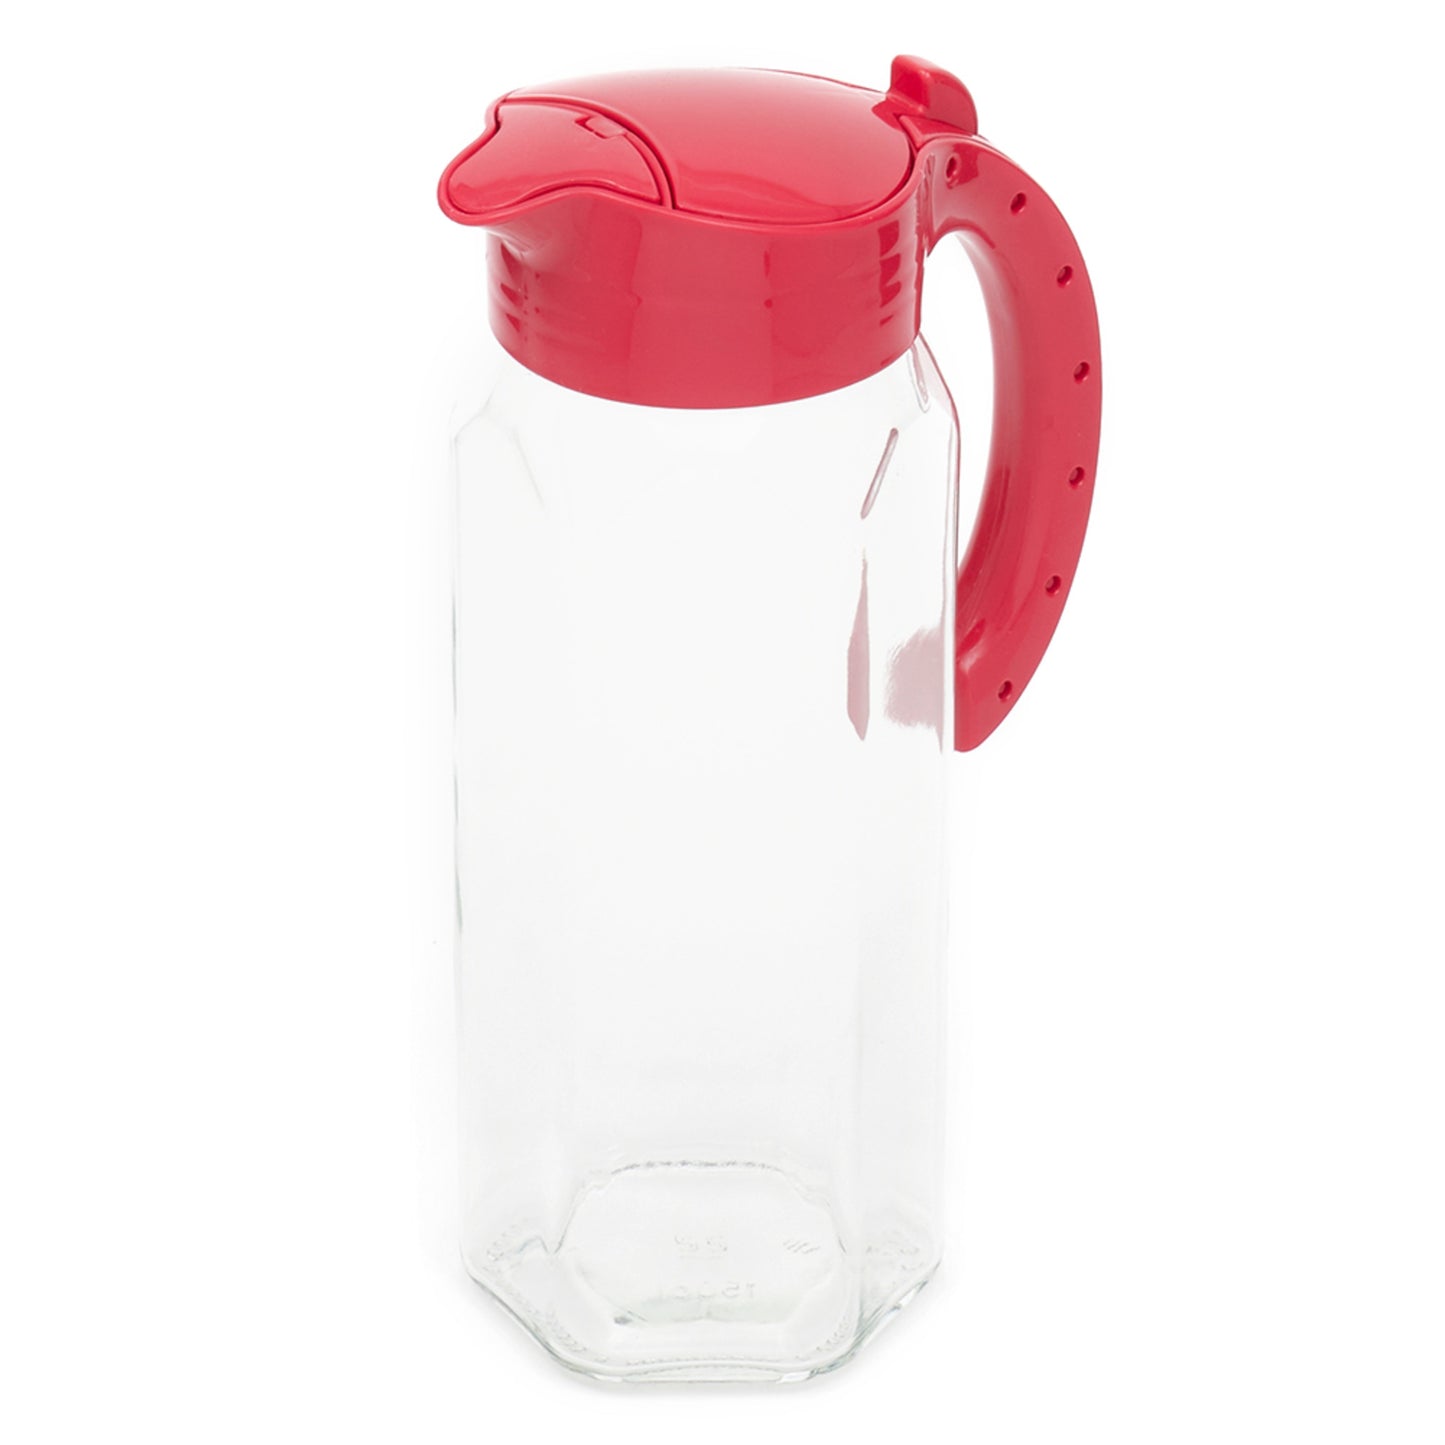 Home Basics 1.5 lt Pitcher, Red - Red